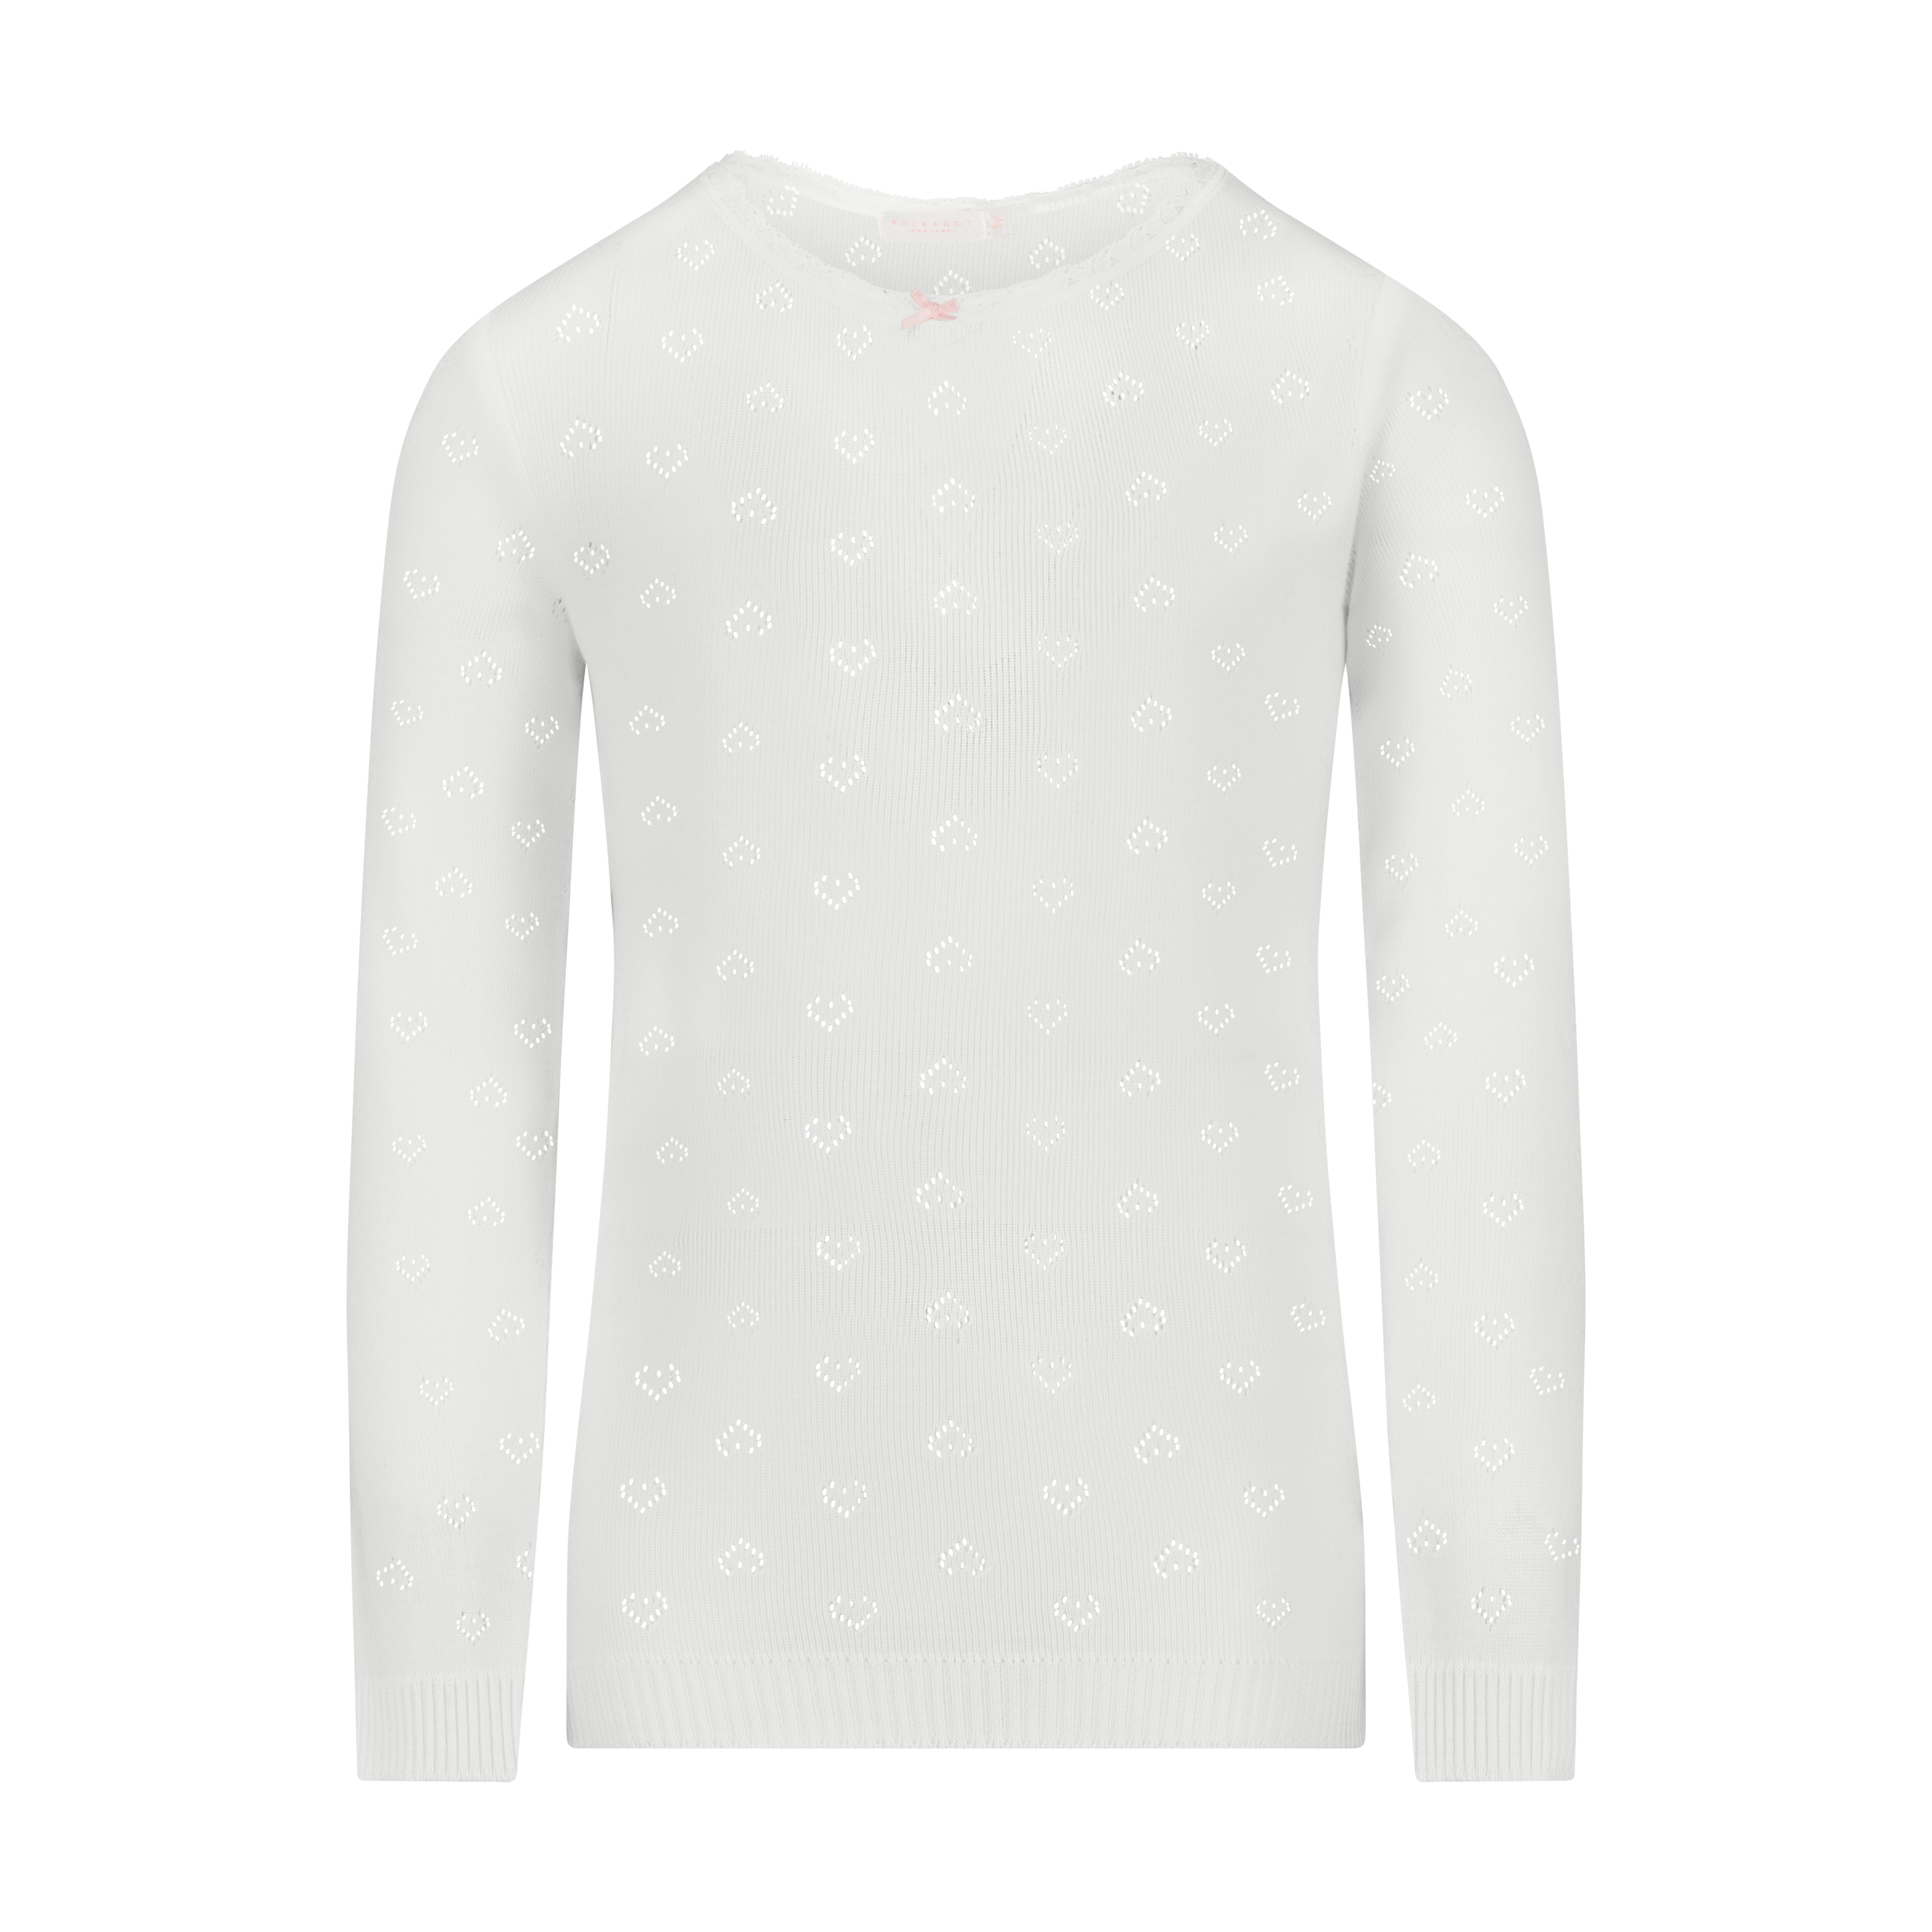 GIRLS & BABY CREW LS Pearl White Vintage Hearts